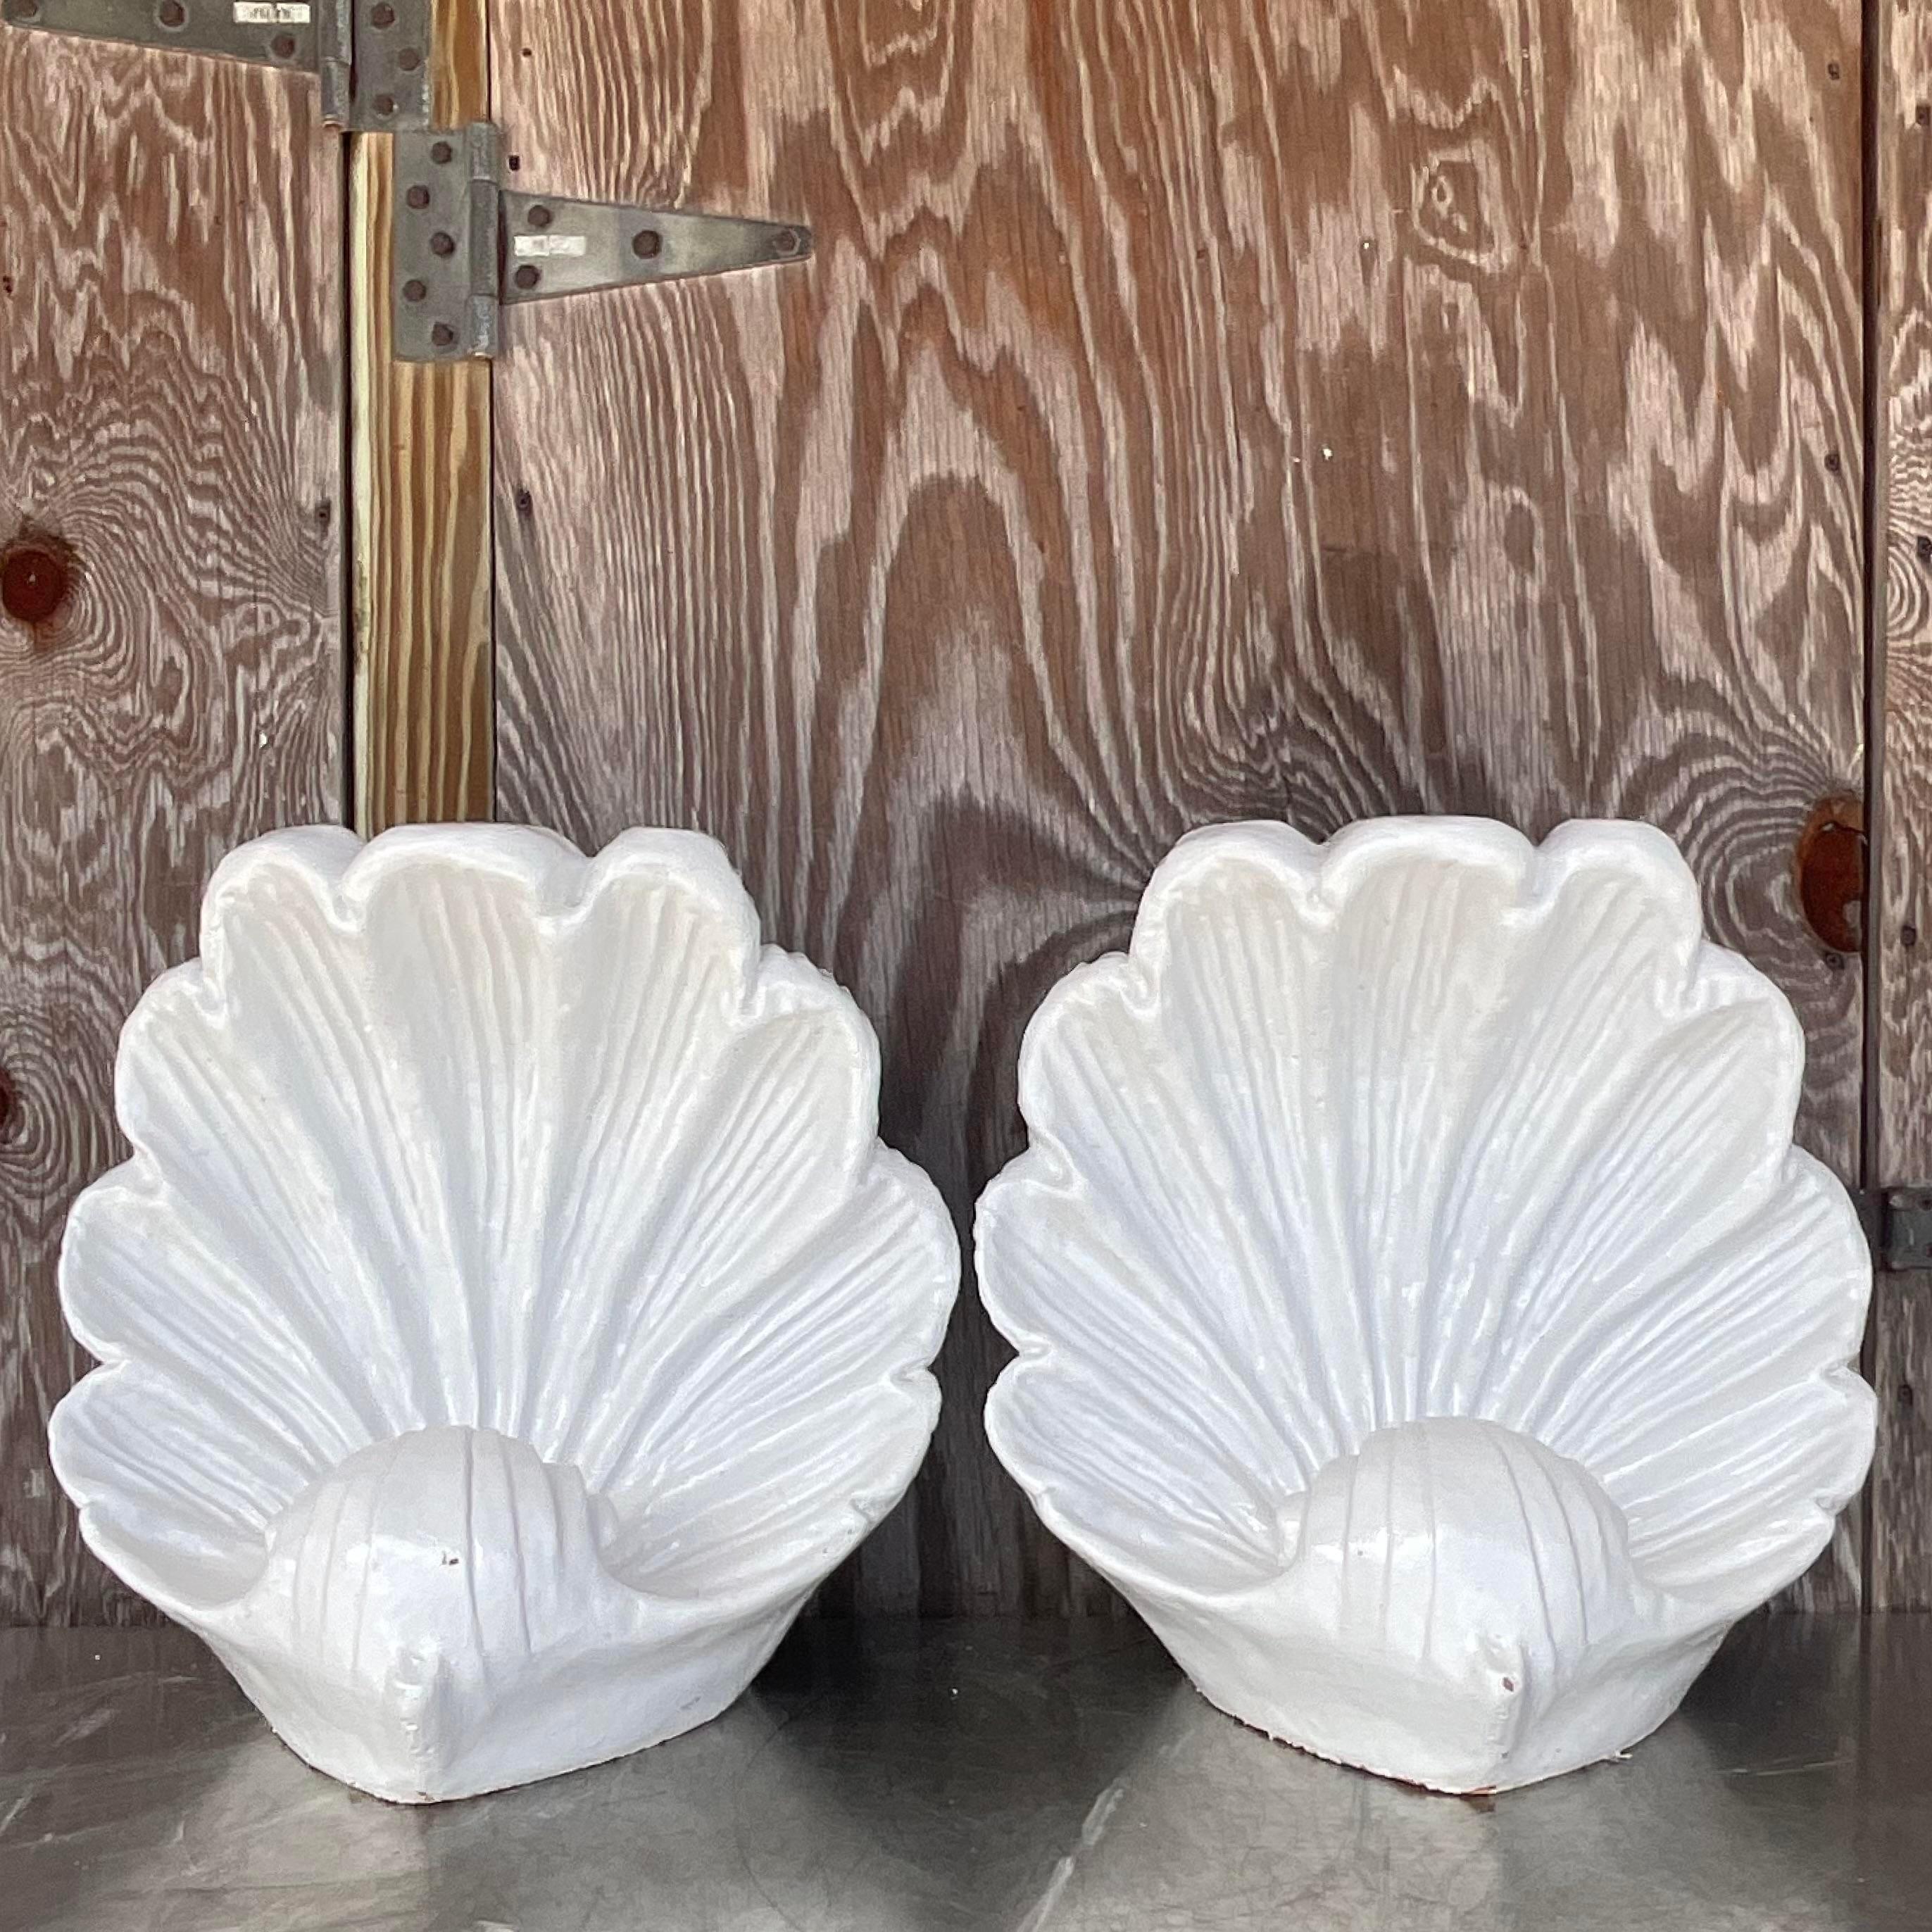 A fabulous pair of large vintage clam shells. A chic pair of ceramic shells in a glazed white finish. Can be used as a coffee table pedestal, but I think they look beautiful as a decorative element. Acquired from a Palm Beach estate